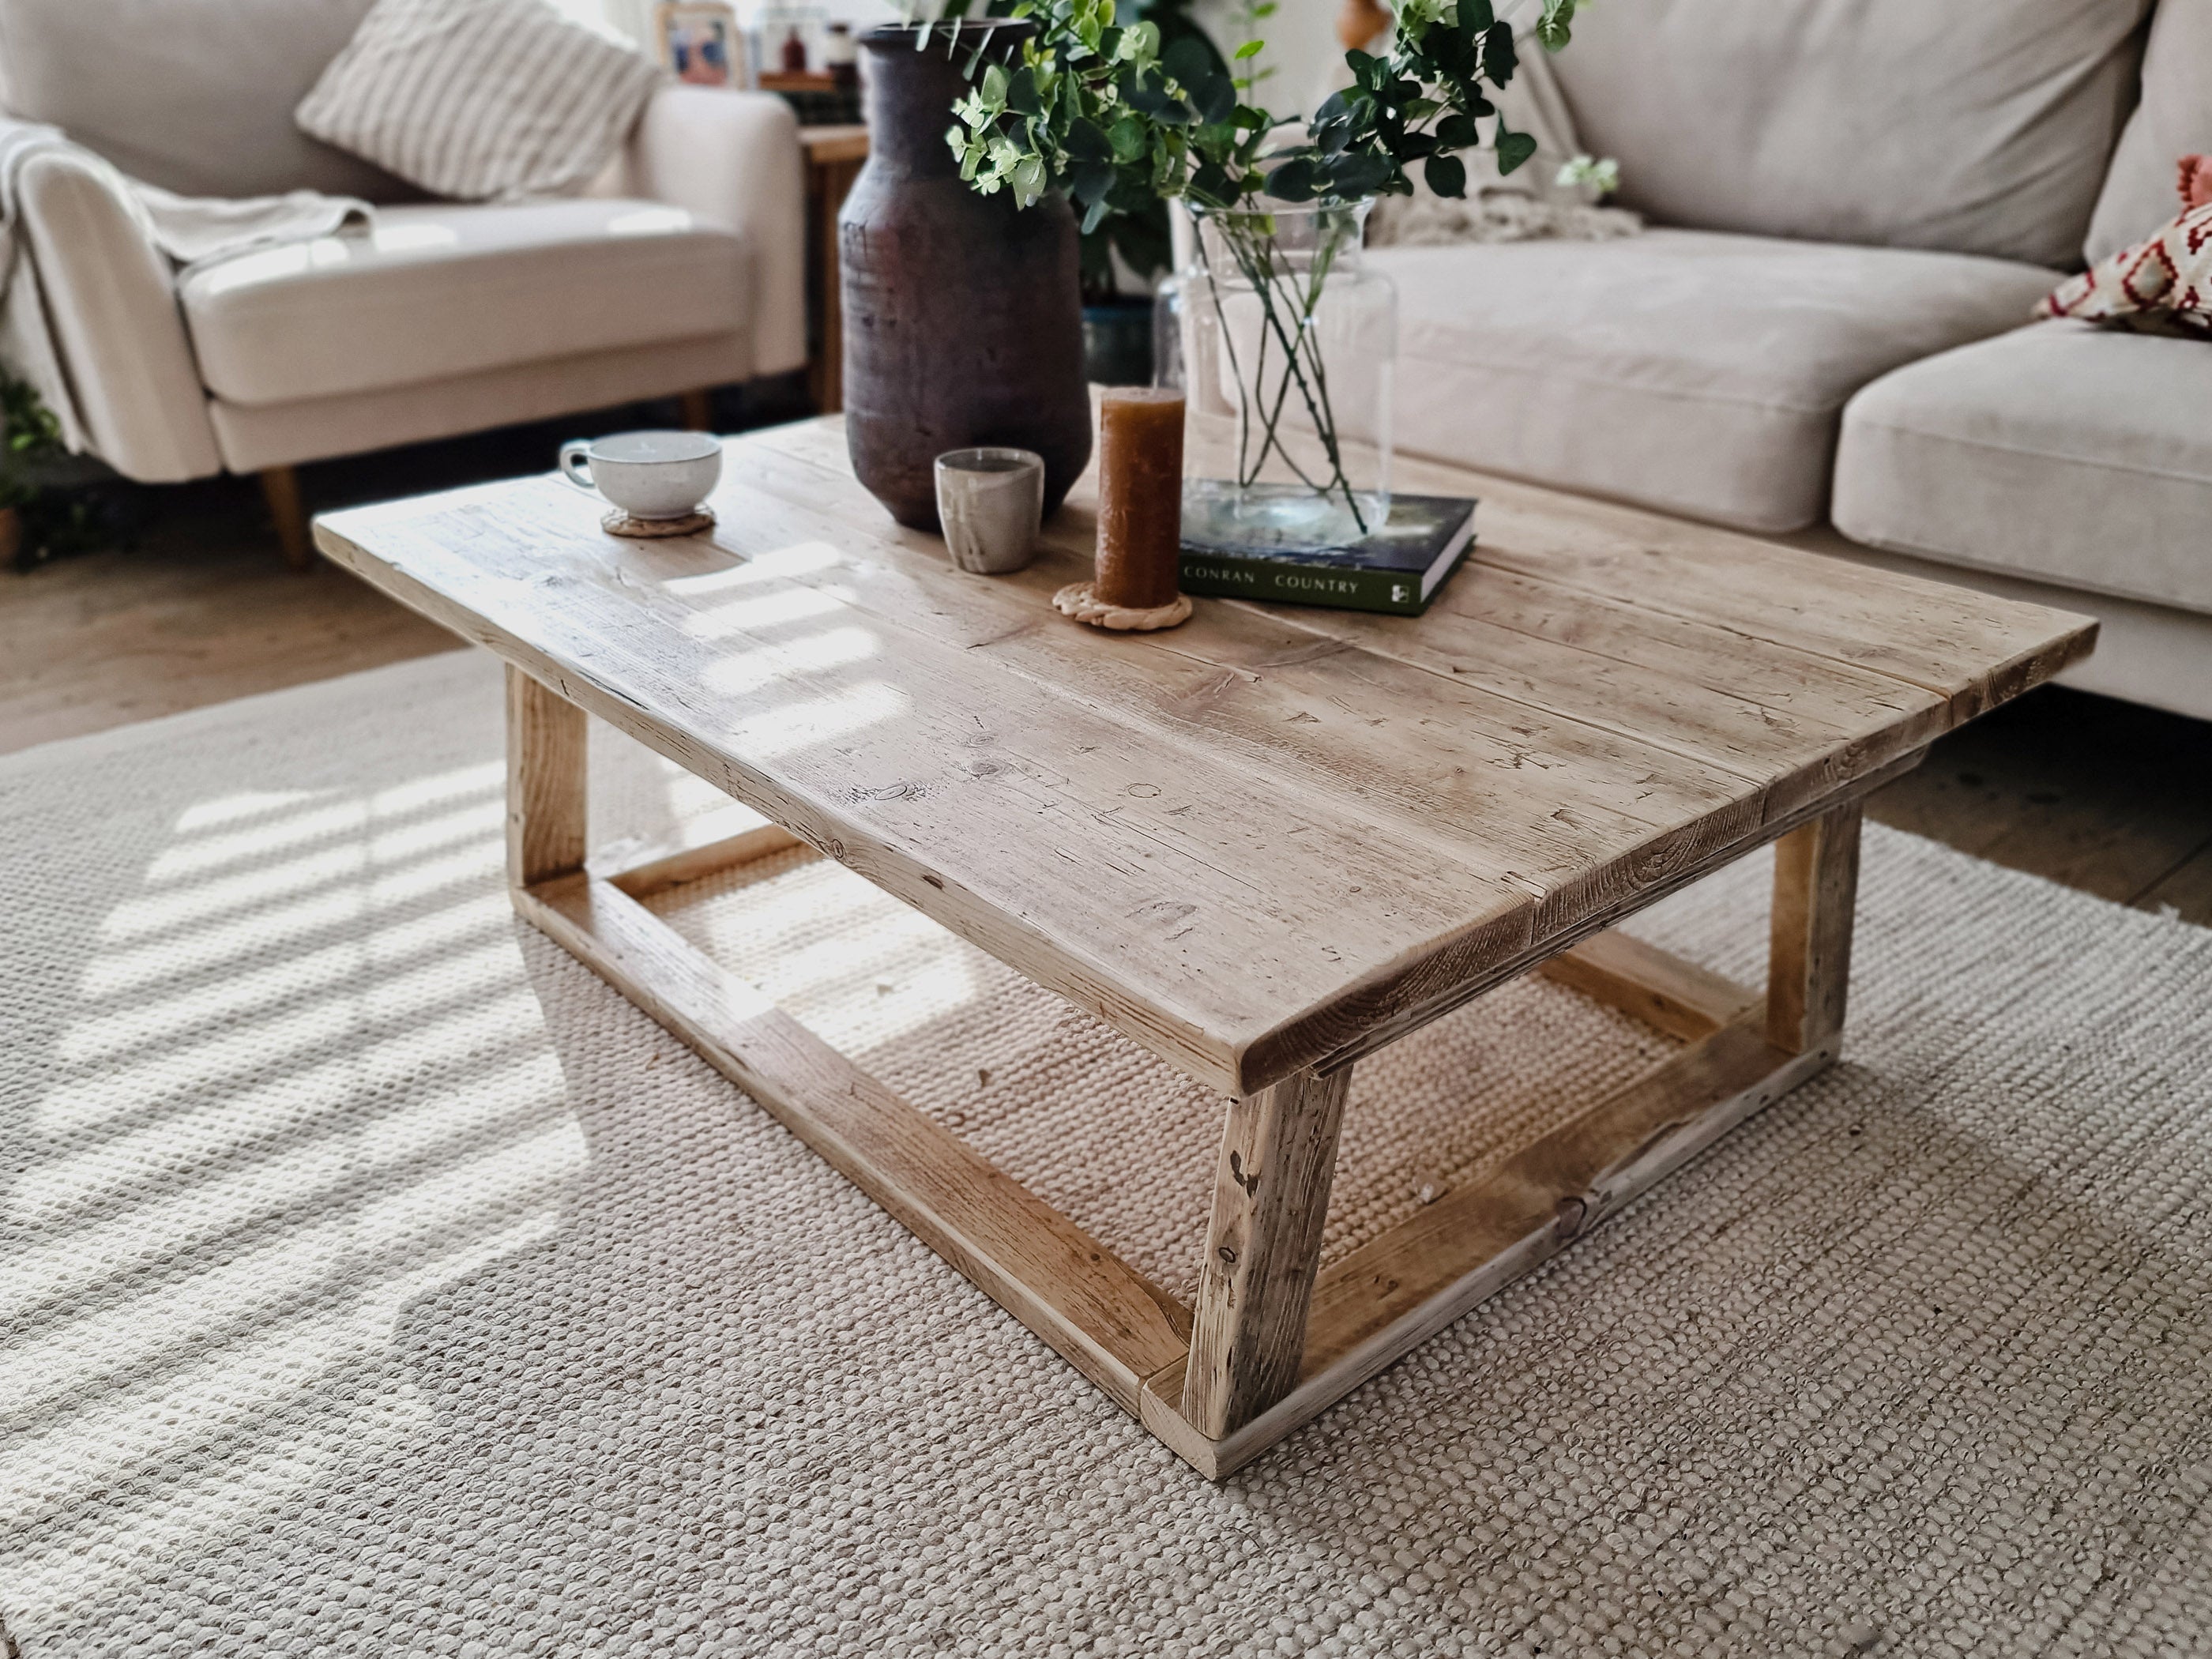 The Hoxton coffee table handmade from reclaimed wood